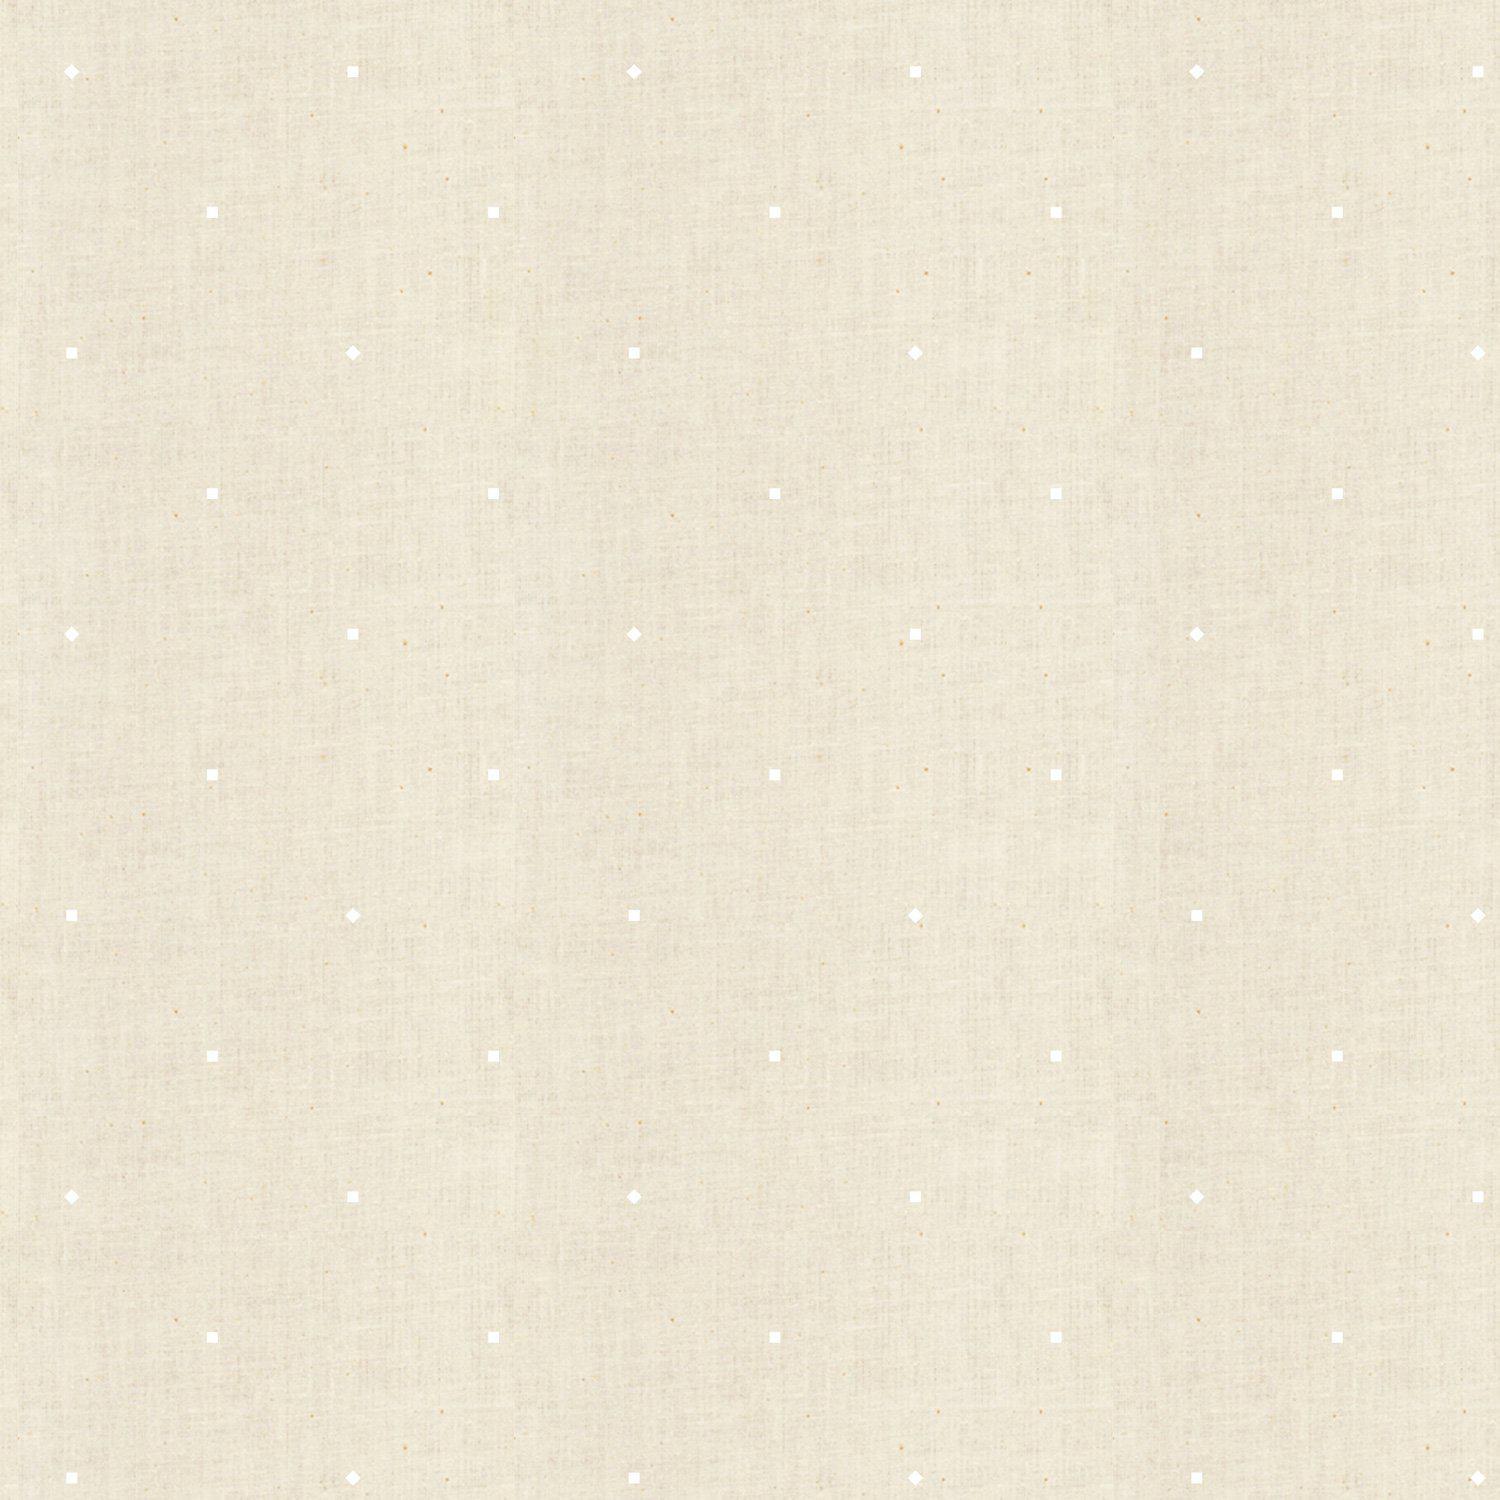 Cotton + Steel-REMNANT: Square Up, Straw Unbleached 30% OFF 2 YDS-fabric remnant-gather here online